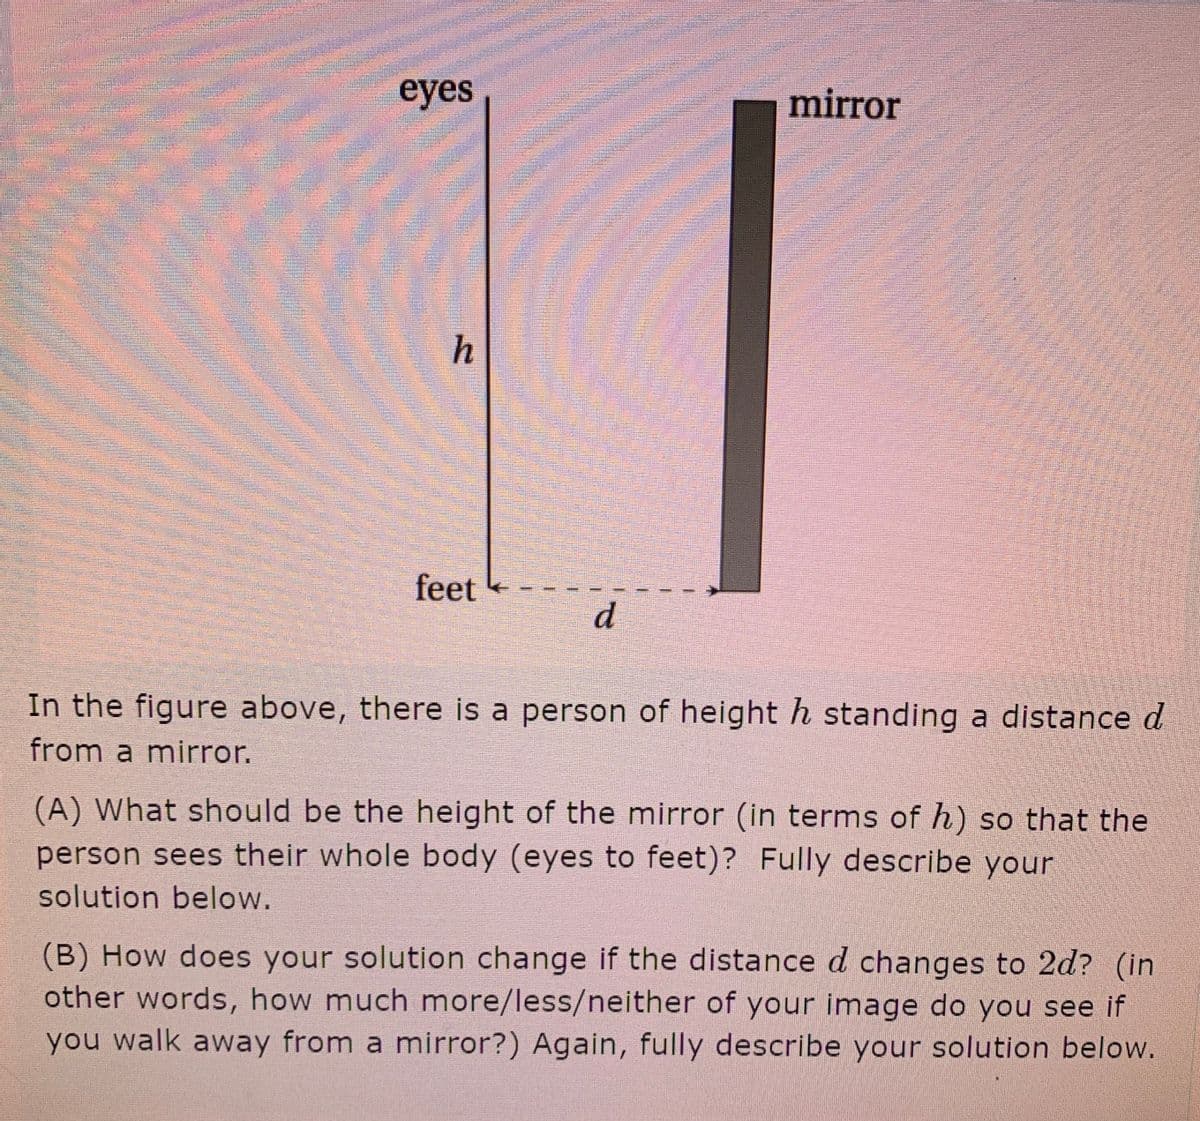 eyes
mirror
h
feet
In the figure above, there is a person of height h standing a distance d
from a mirror.
(A) What should be the height of the mirror (in terms of h) so that the
person sees their whole body (eyes to feet)? Fully describe your
solution below.
(B) How does your solution change if the distance d changes to 2d? (in
other words, how much more/less/neither of your image do you see if
you walk away from a mirror?) Again, fully describe your solution below.
